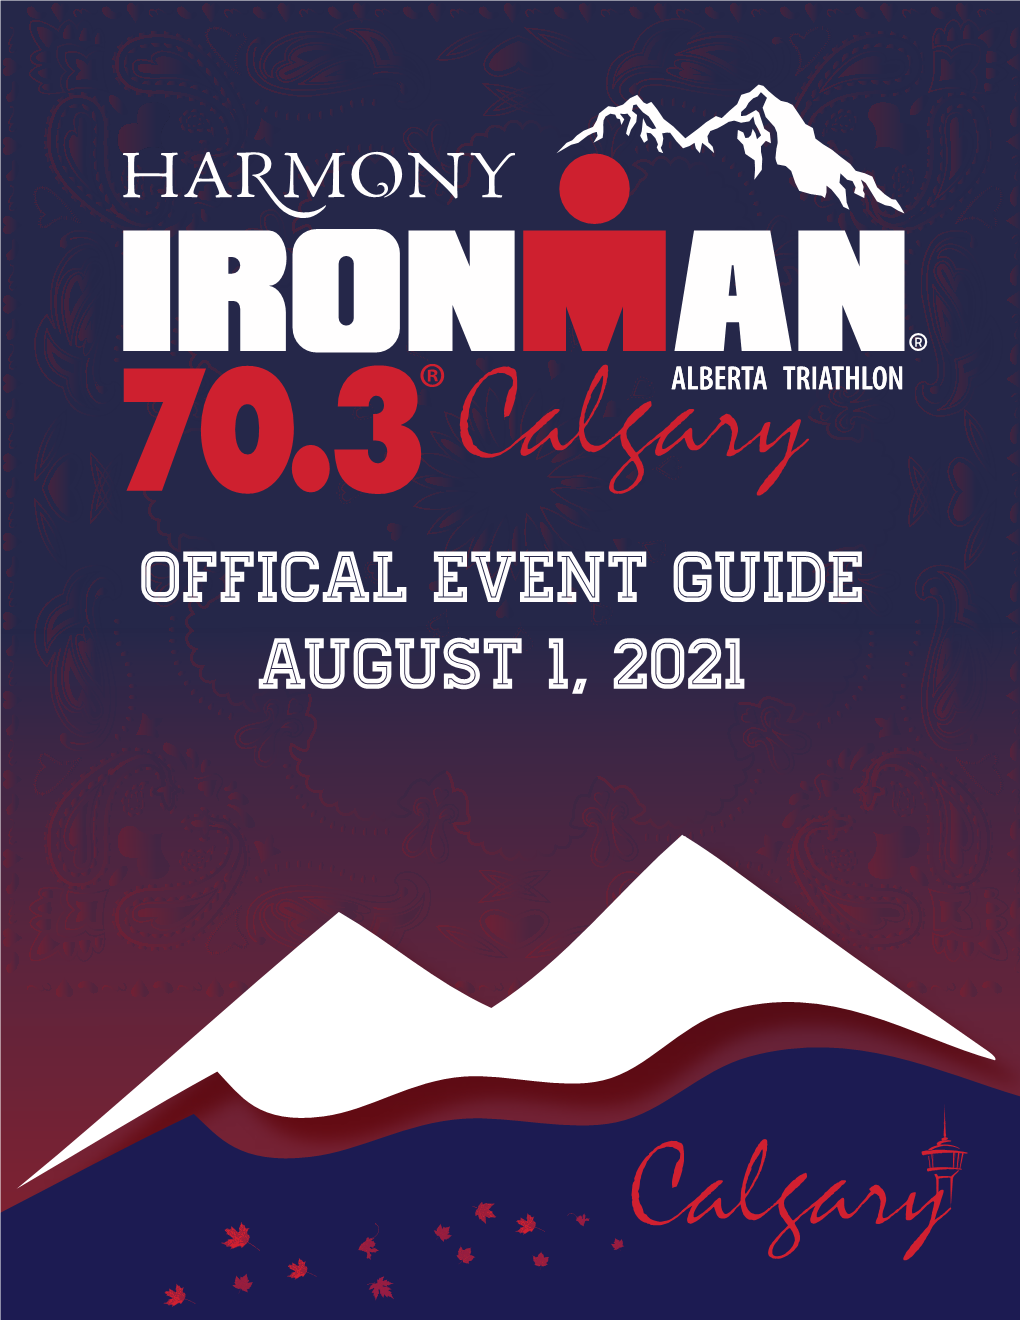 Offical Event Guide August 1, 2021 Community of the Year Winner 4X 2019 Calgary Region